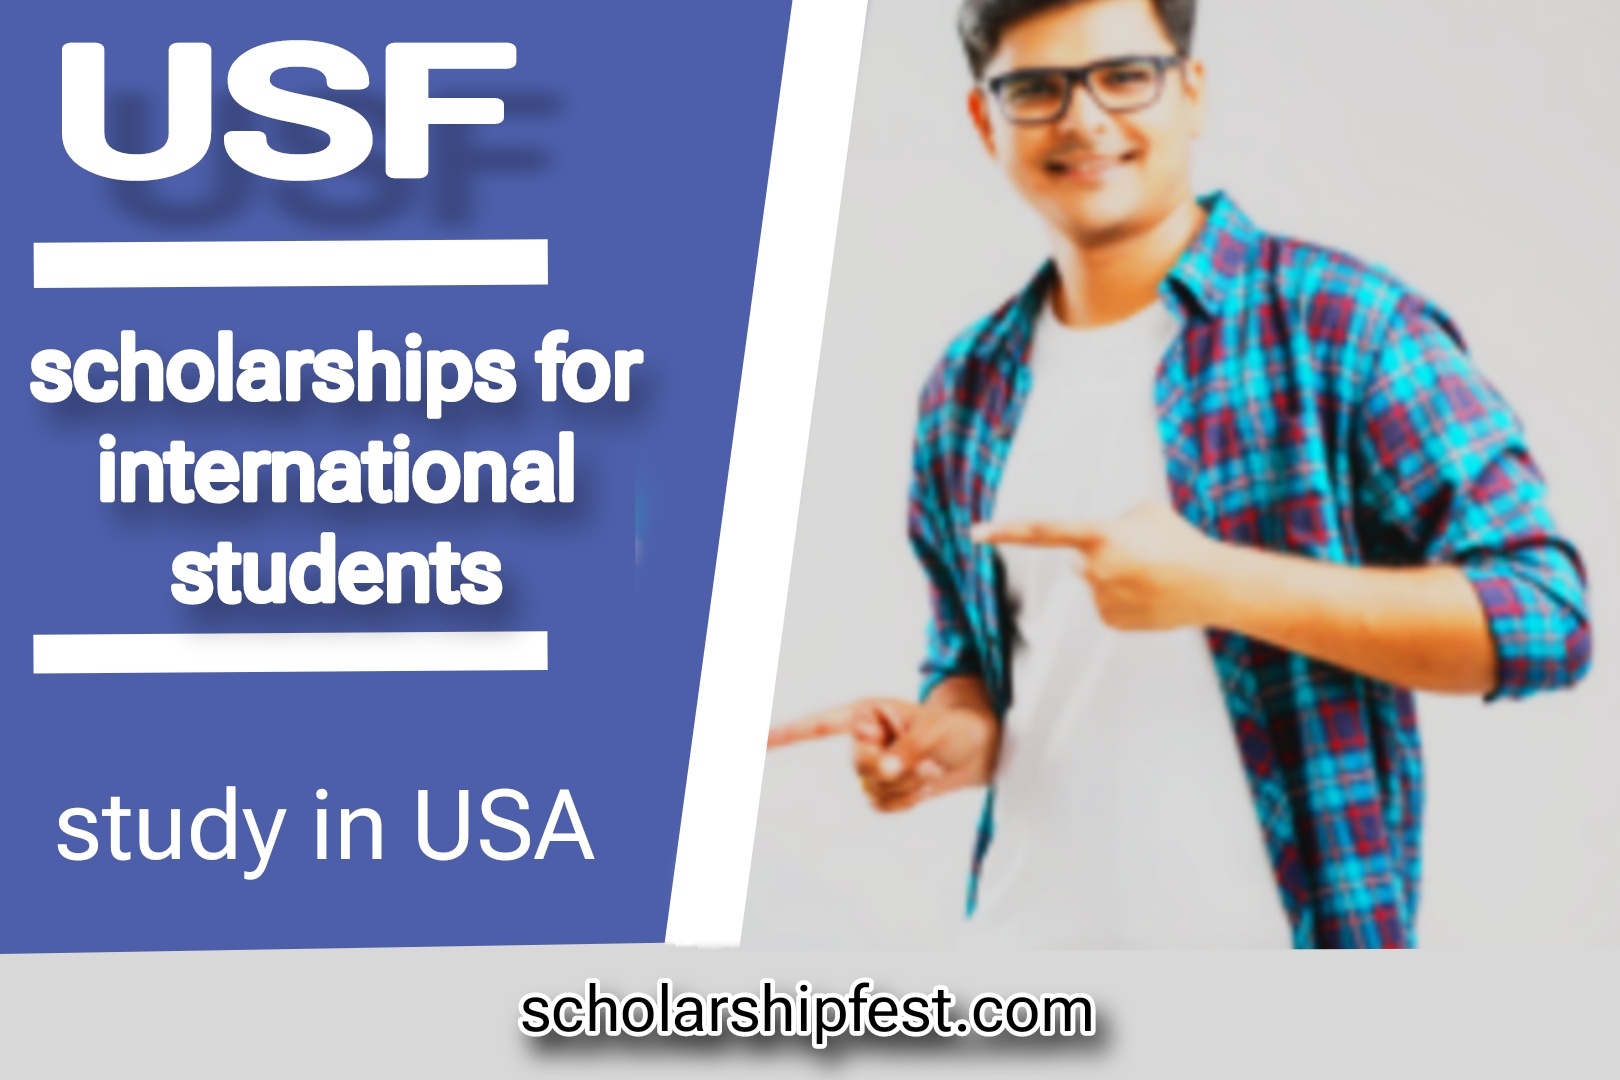 USF Scholarships For International Students